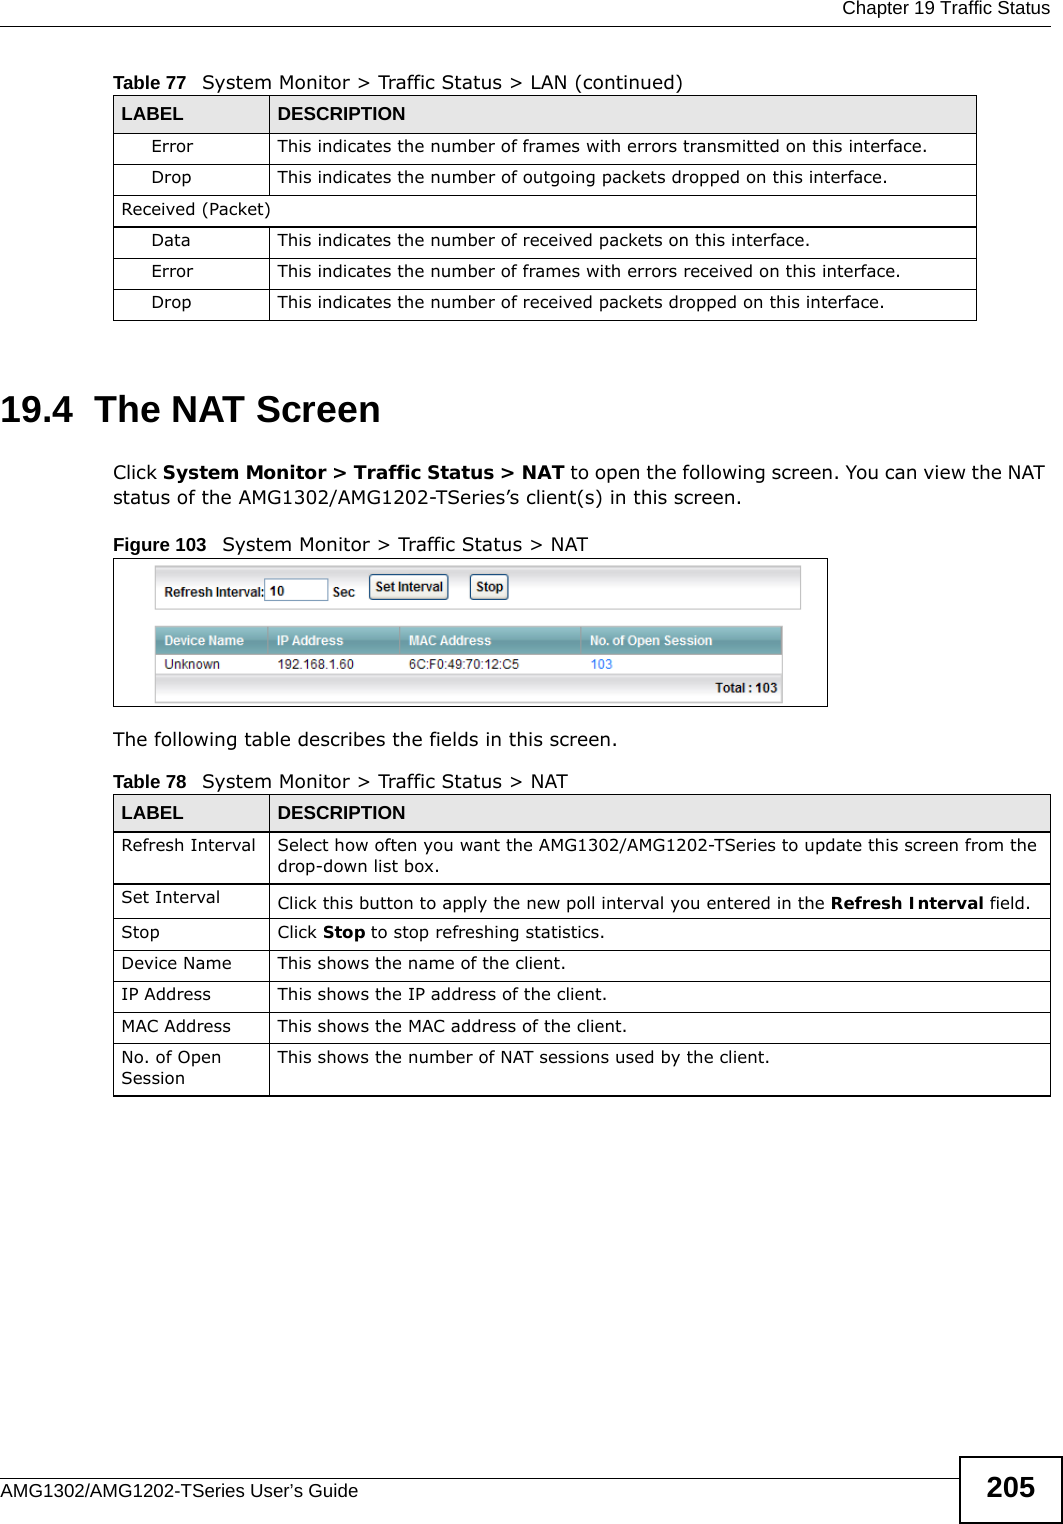  Chapter 19 Traffic StatusAMG1302/AMG1202-TSeries User’s Guide 20519.4  The NAT ScreenClick System Monitor &gt; Traffic Status &gt; NAT to open the following screen. You can view the NAT status of the AMG1302/AMG1202-TSeries’s client(s) in this screen.Figure 103   System Monitor &gt; Traffic Status &gt; NATThe following table describes the fields in this screen.Error This indicates the number of frames with errors transmitted on this interface.Drop This indicates the number of outgoing packets dropped on this interface.Received (Packet) Data  This indicates the number of received packets on this interface.Error This indicates the number of frames with errors received on this interface.Drop This indicates the number of received packets dropped on this interface.Table 77   System Monitor &gt; Traffic Status &gt; LAN (continued)LABEL DESCRIPTIONTable 78   System Monitor &gt; Traffic Status &gt; NATLABEL DESCRIPTIONRefresh Interval Select how often you want the AMG1302/AMG1202-TSeries to update this screen from the drop-down list box.Set Interval Click this button to apply the new poll interval you entered in the Refresh Interval field.Stop Click Stop to stop refreshing statistics.Device Name This shows the name of the client.IP Address This shows the IP address of the client.MAC Address This shows the MAC address of the client.No. of Open SessionThis shows the number of NAT sessions used by the client.